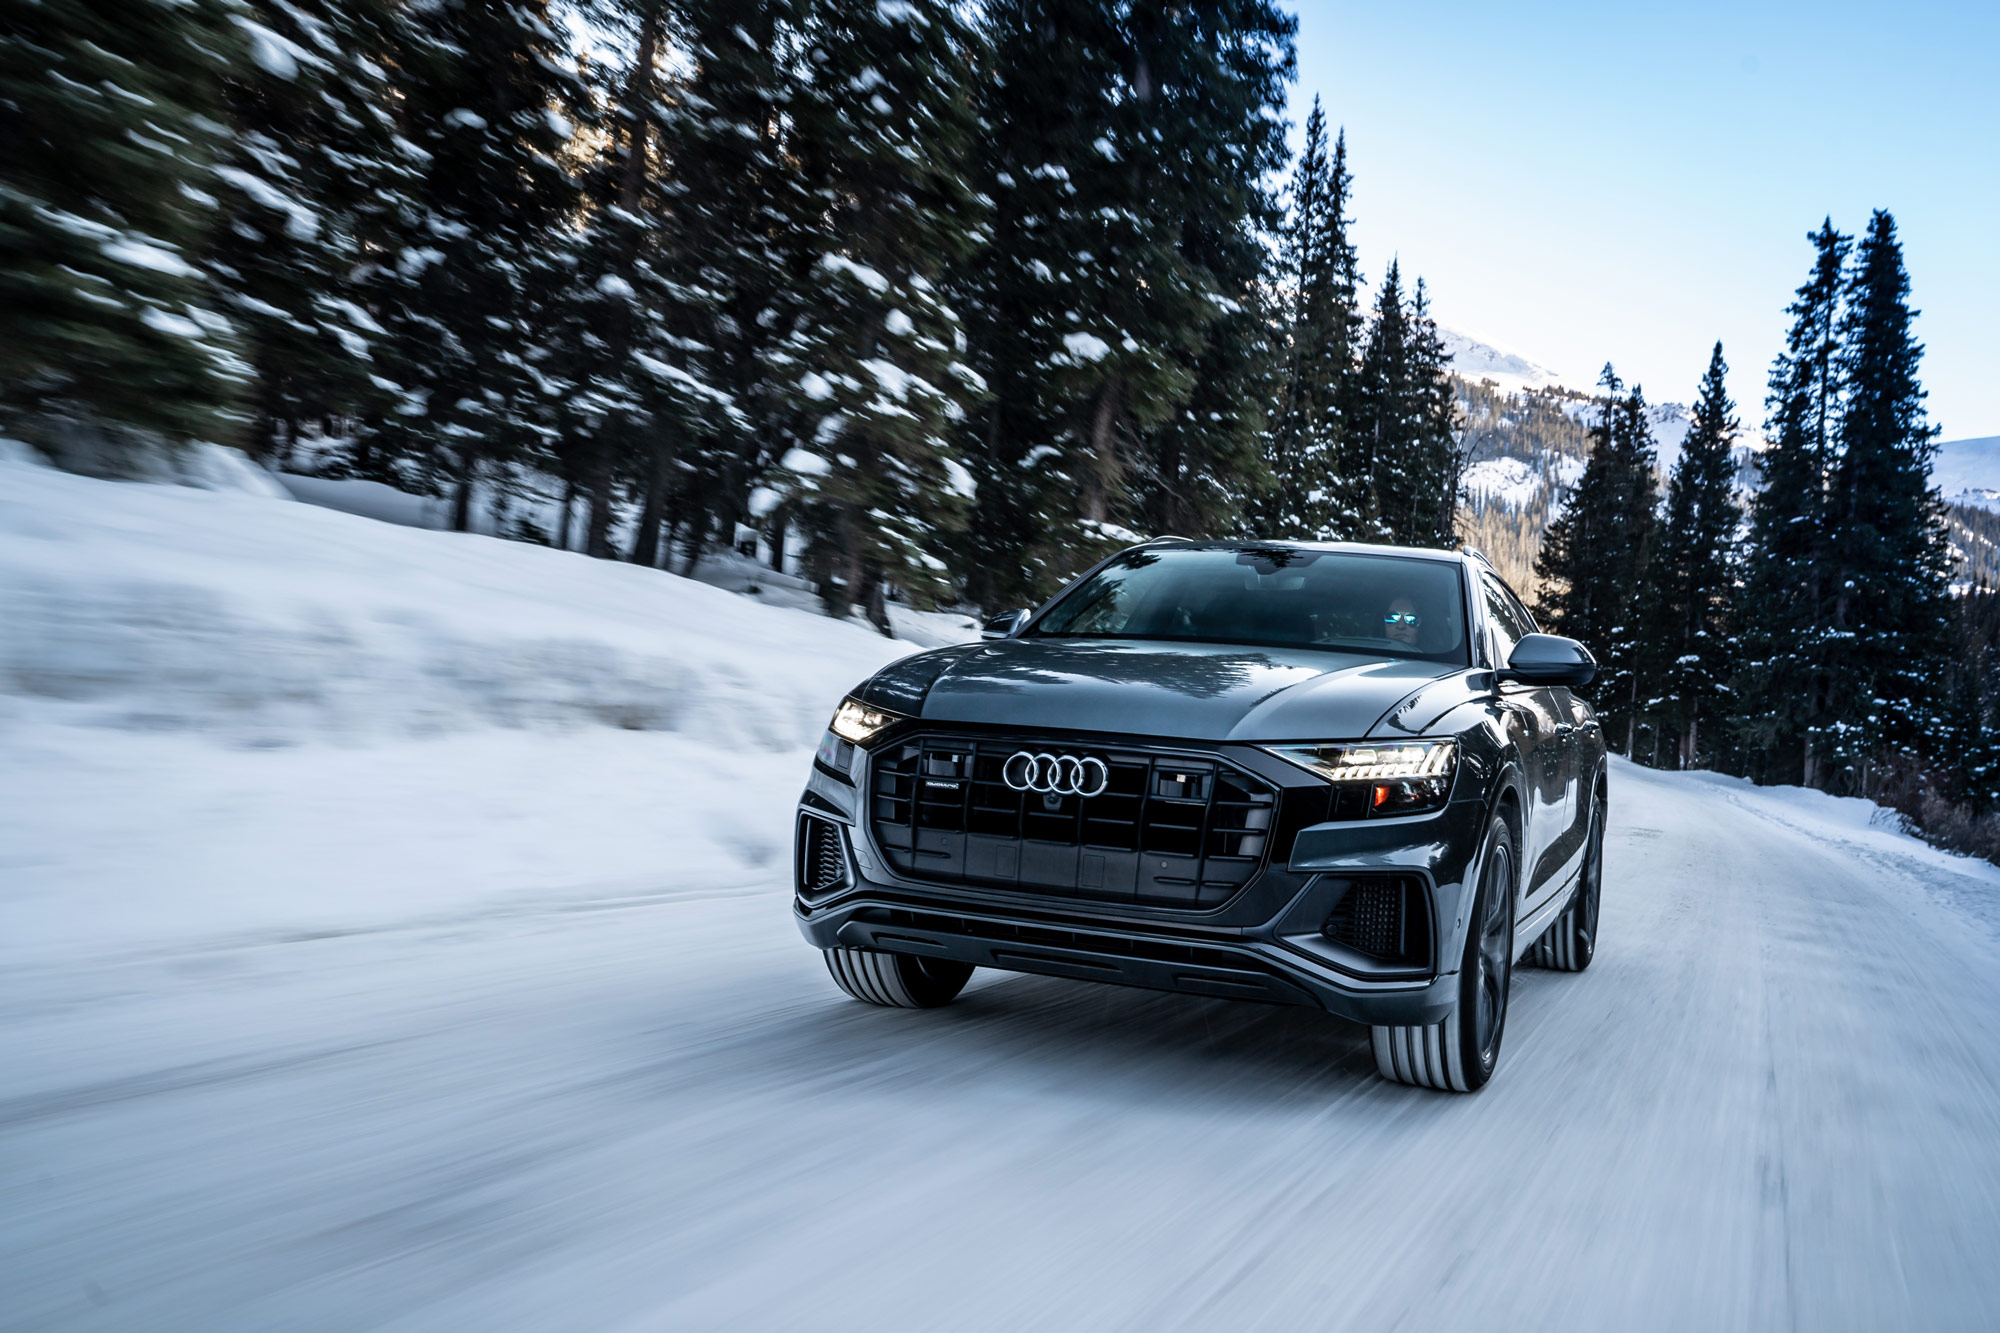 2022 Audi Q8 driving on snow-covered road in a forest.